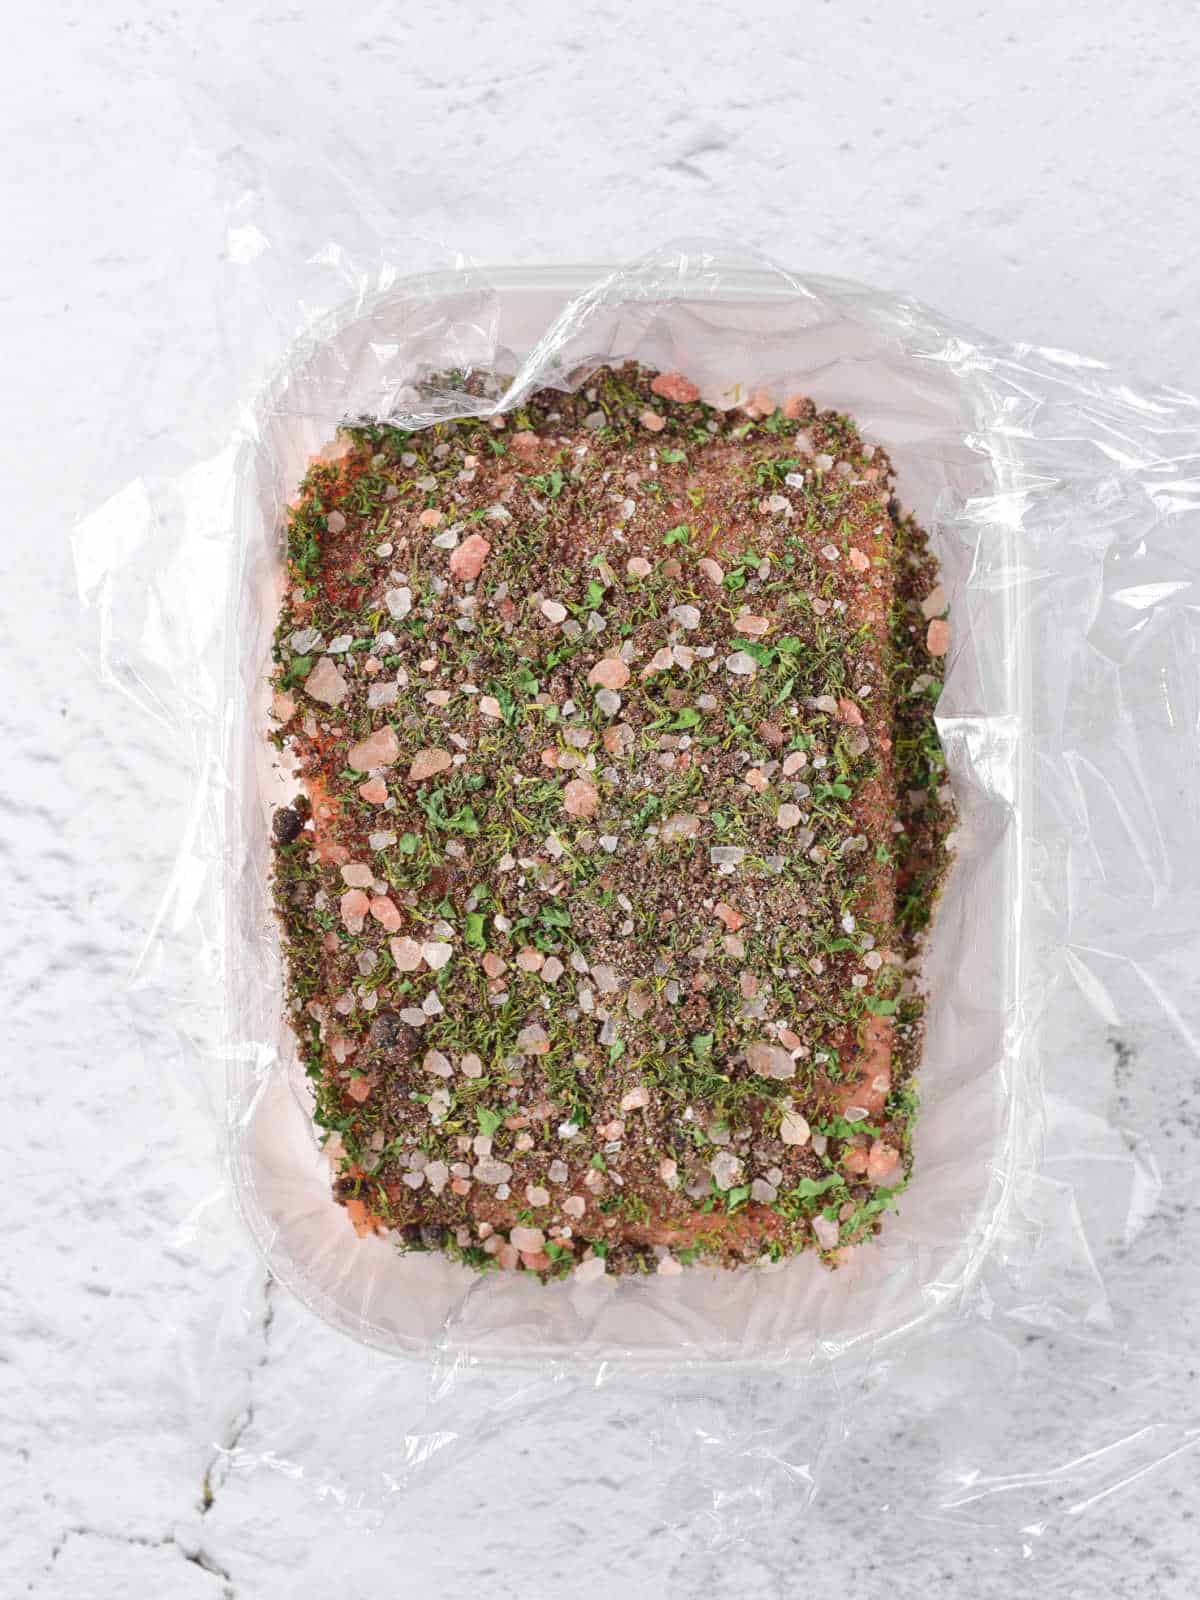 Plastic lined container with salmon covered in salt and herbs. White marble surface.